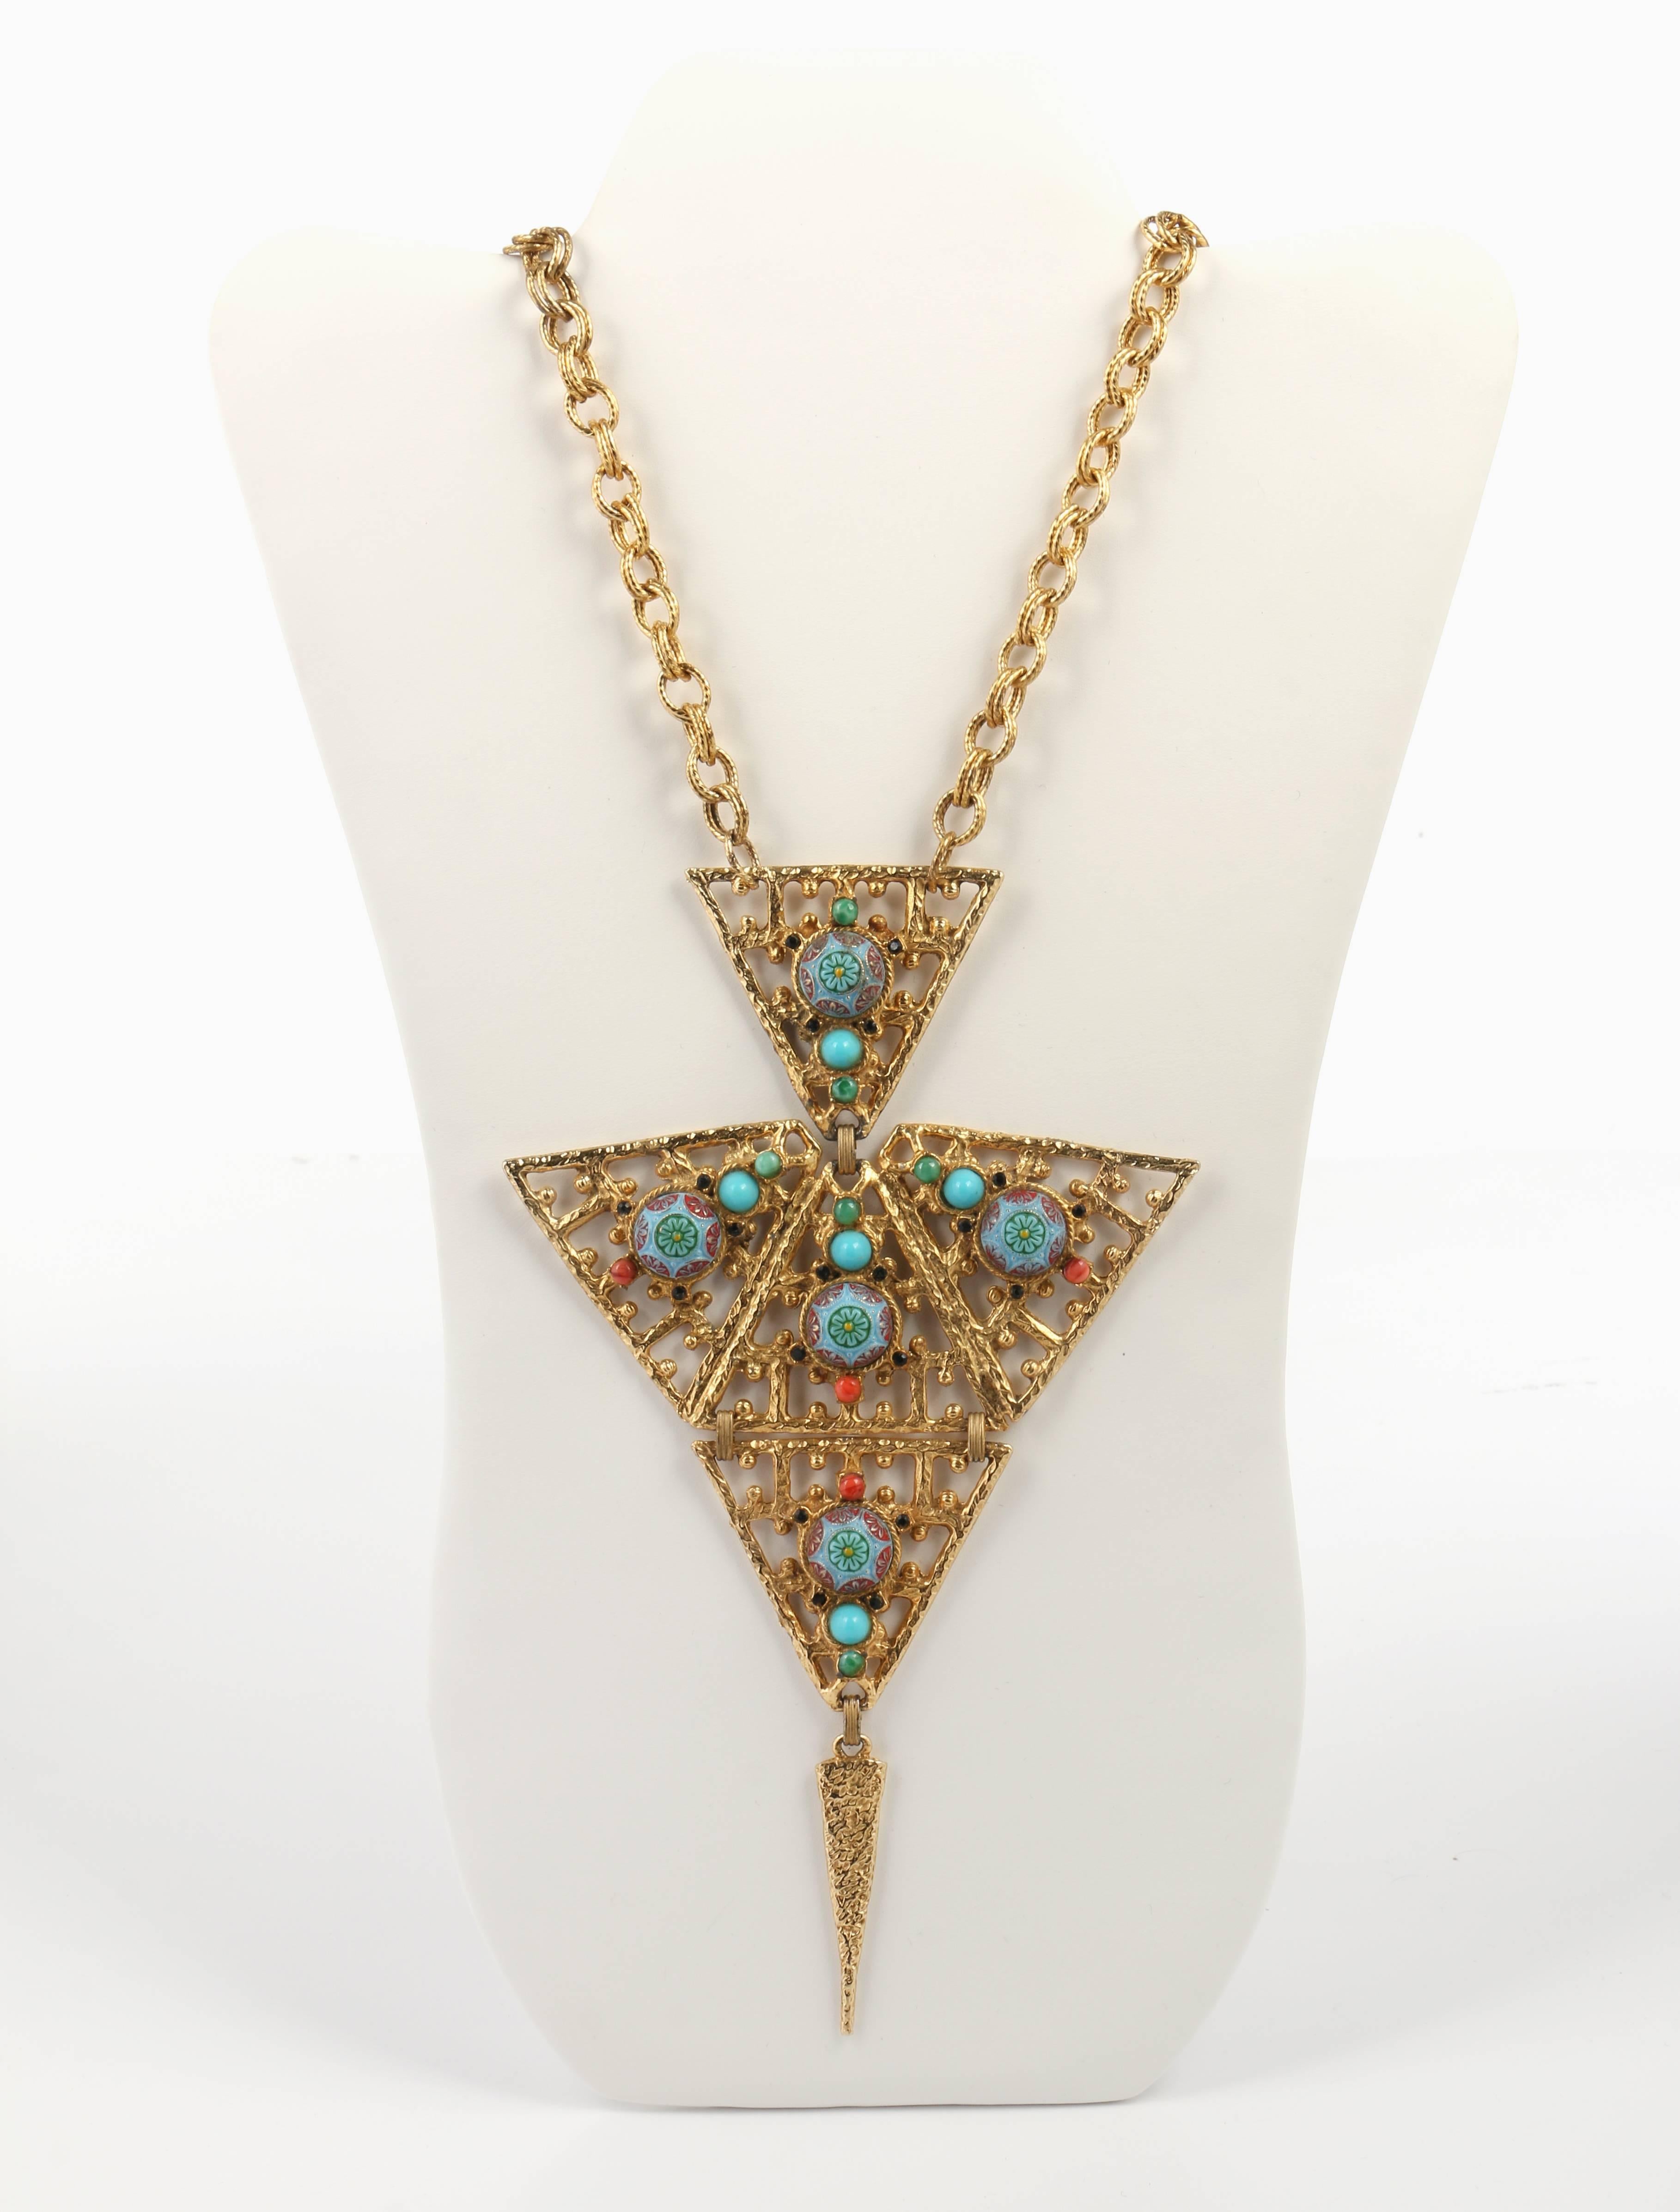 Vintage 1970's Juliana D & E, Delizza & Elster statement turquoise Moroccan matrix stone pendant necklace. Heavy etched gold tone double cable link chain with adjustable fish hook clasp measures approximately 29.5